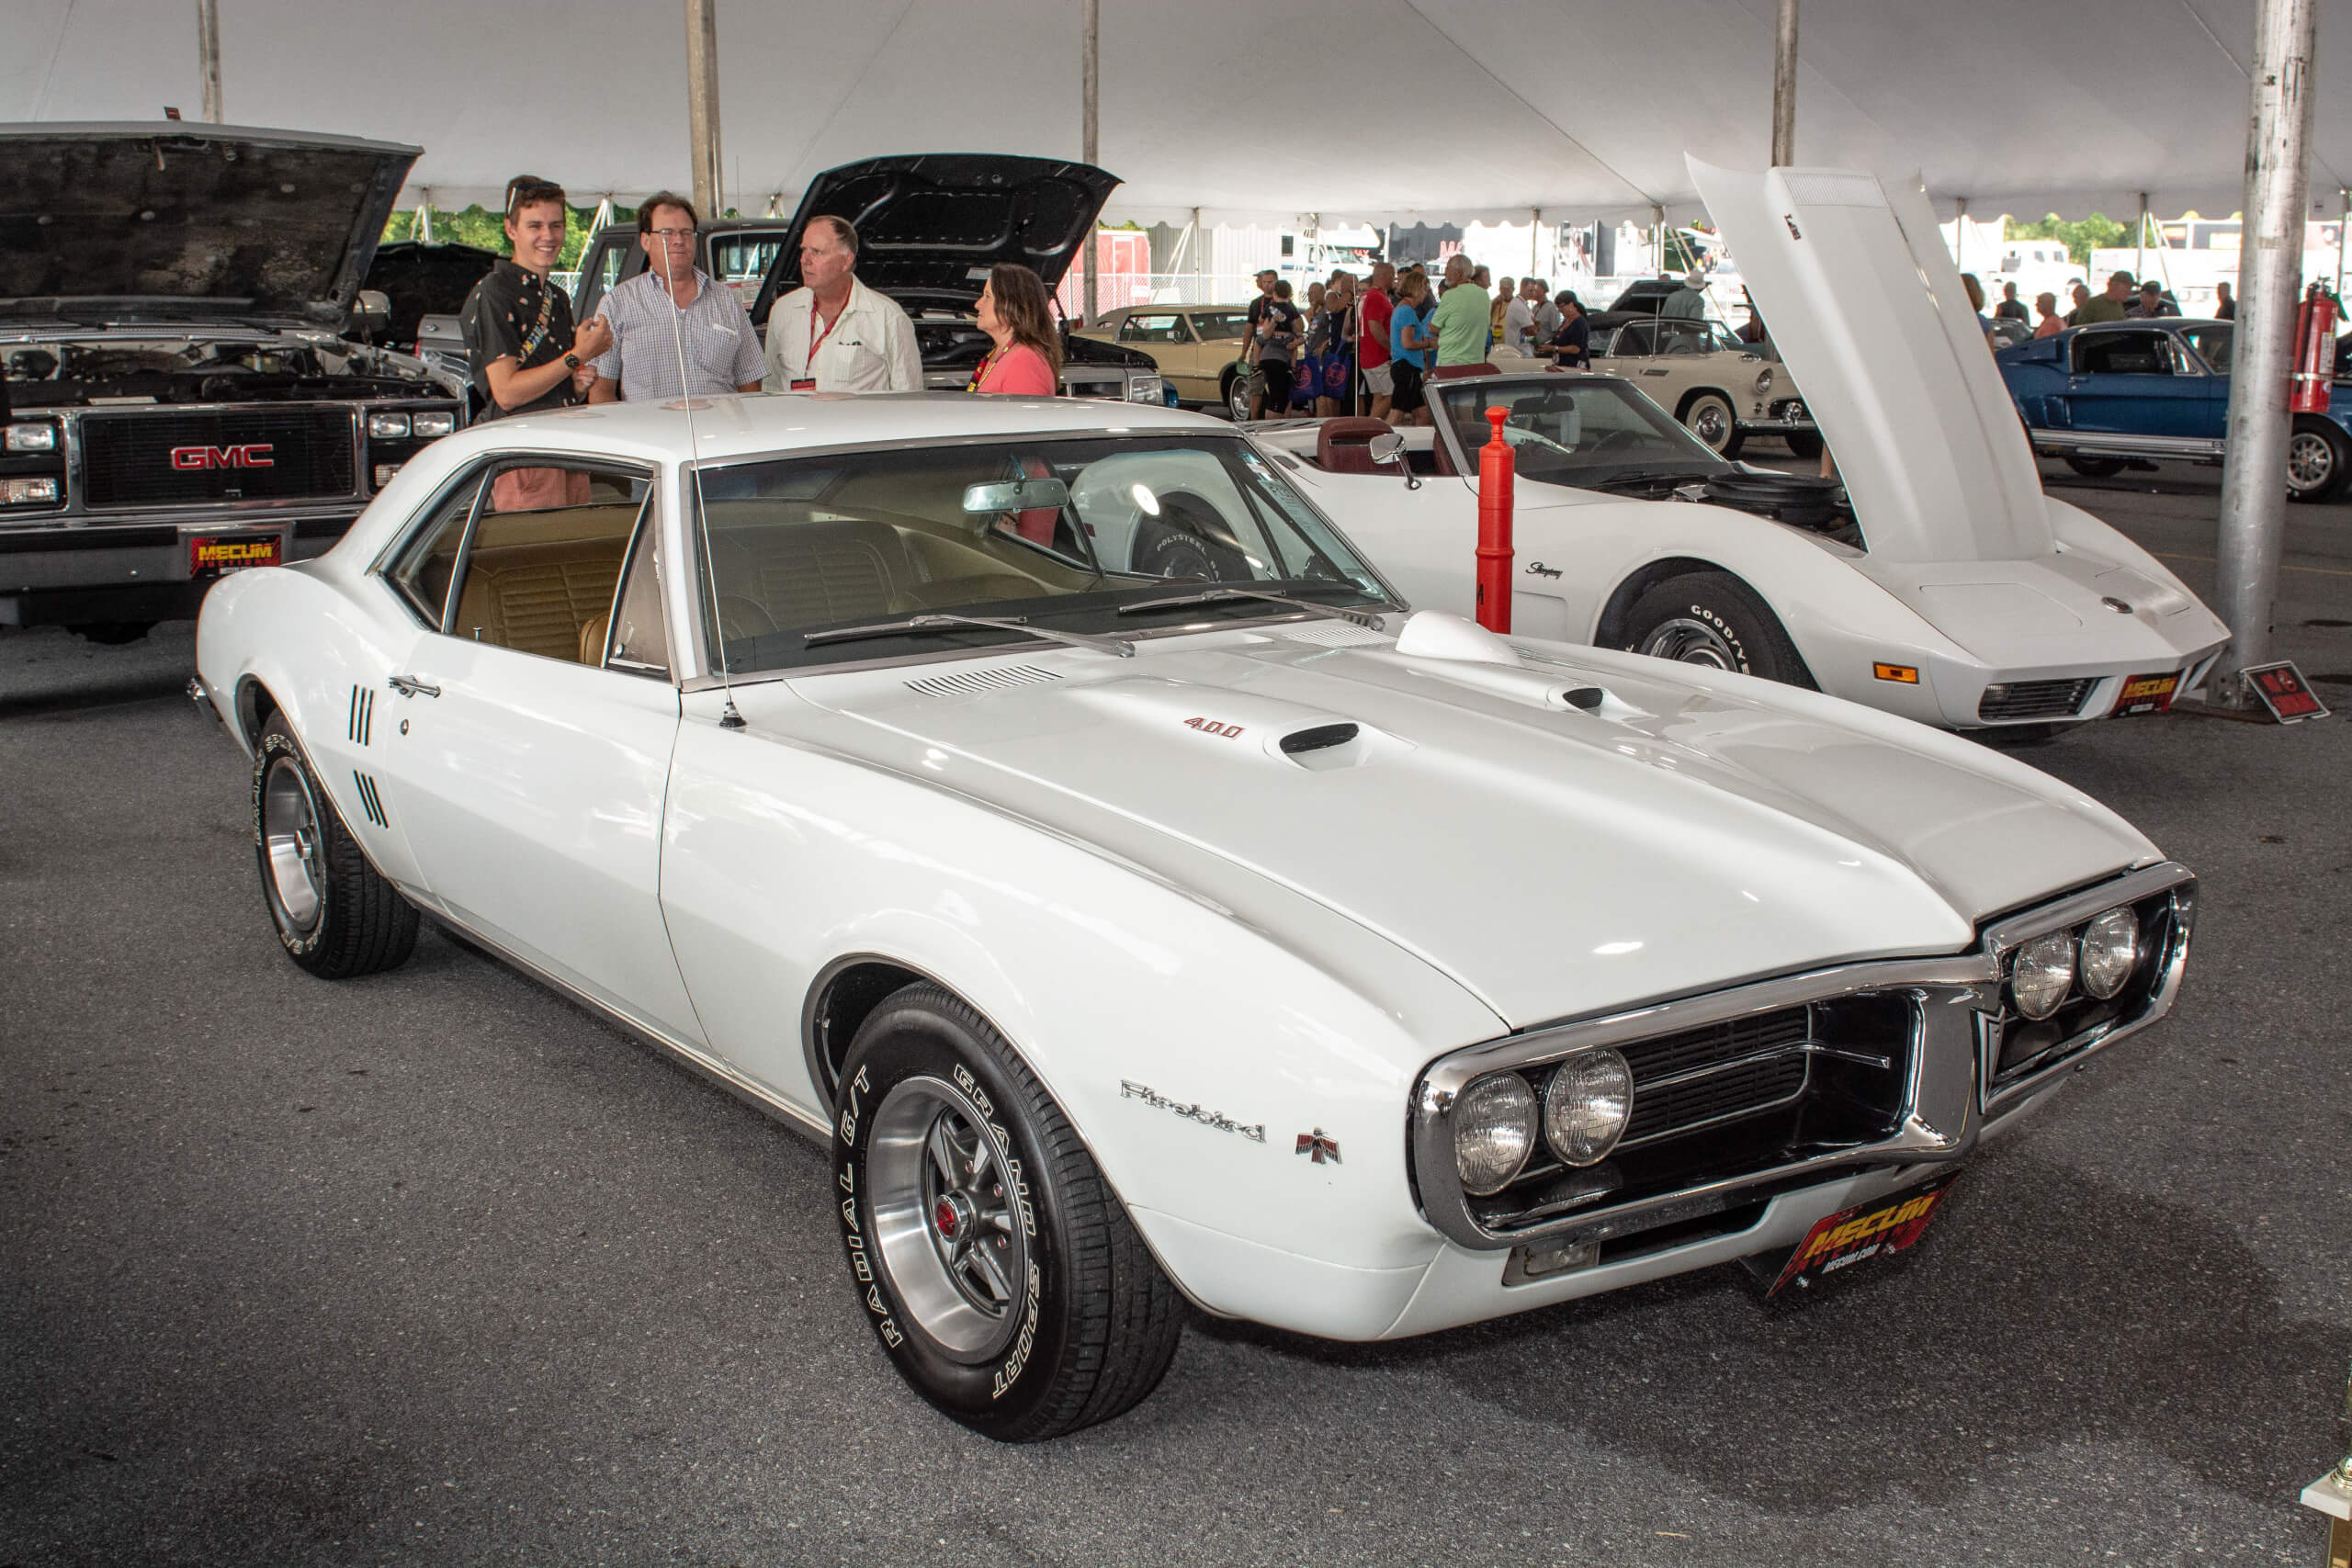 This 1967 Pontiac Firebird has stayed in the same family since new. It was purchased at Tom Ray Pontiac in Glendale, California.